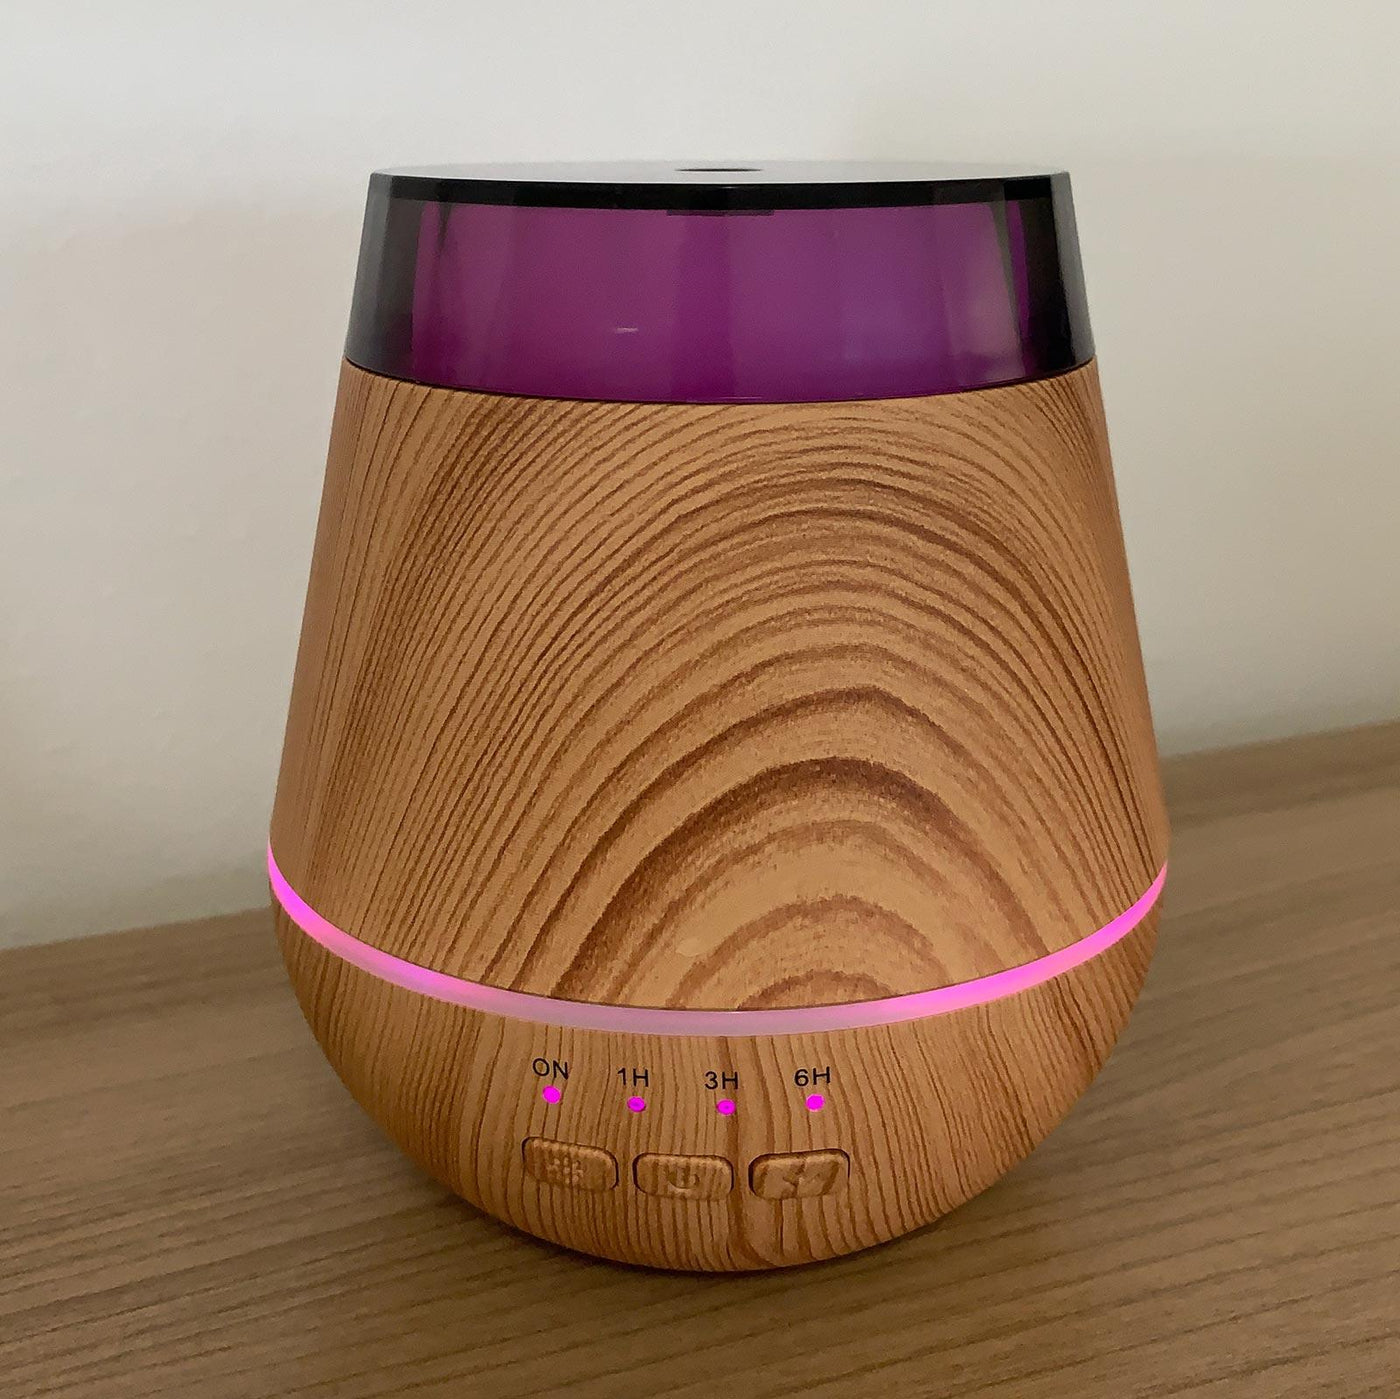 Helsinki Ultrasonic LED Light Colour Change Aroma Diffuser With Timer.